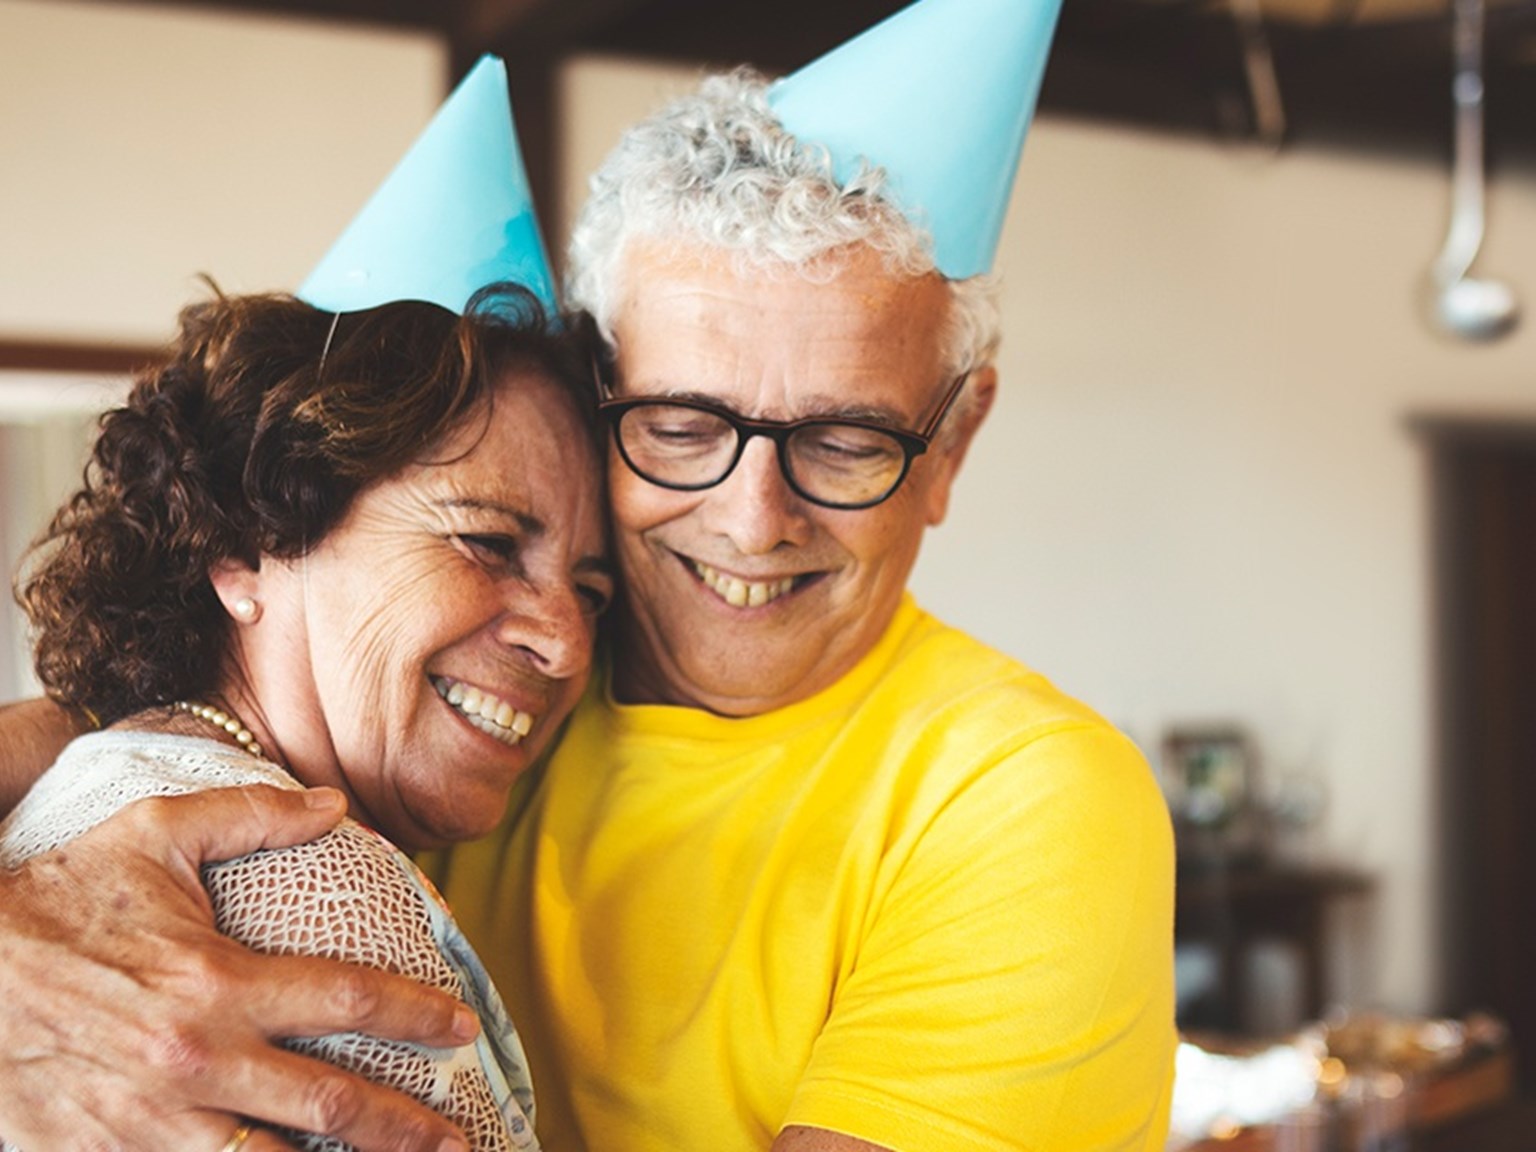 Couple hugging and smiling while wearing party hats